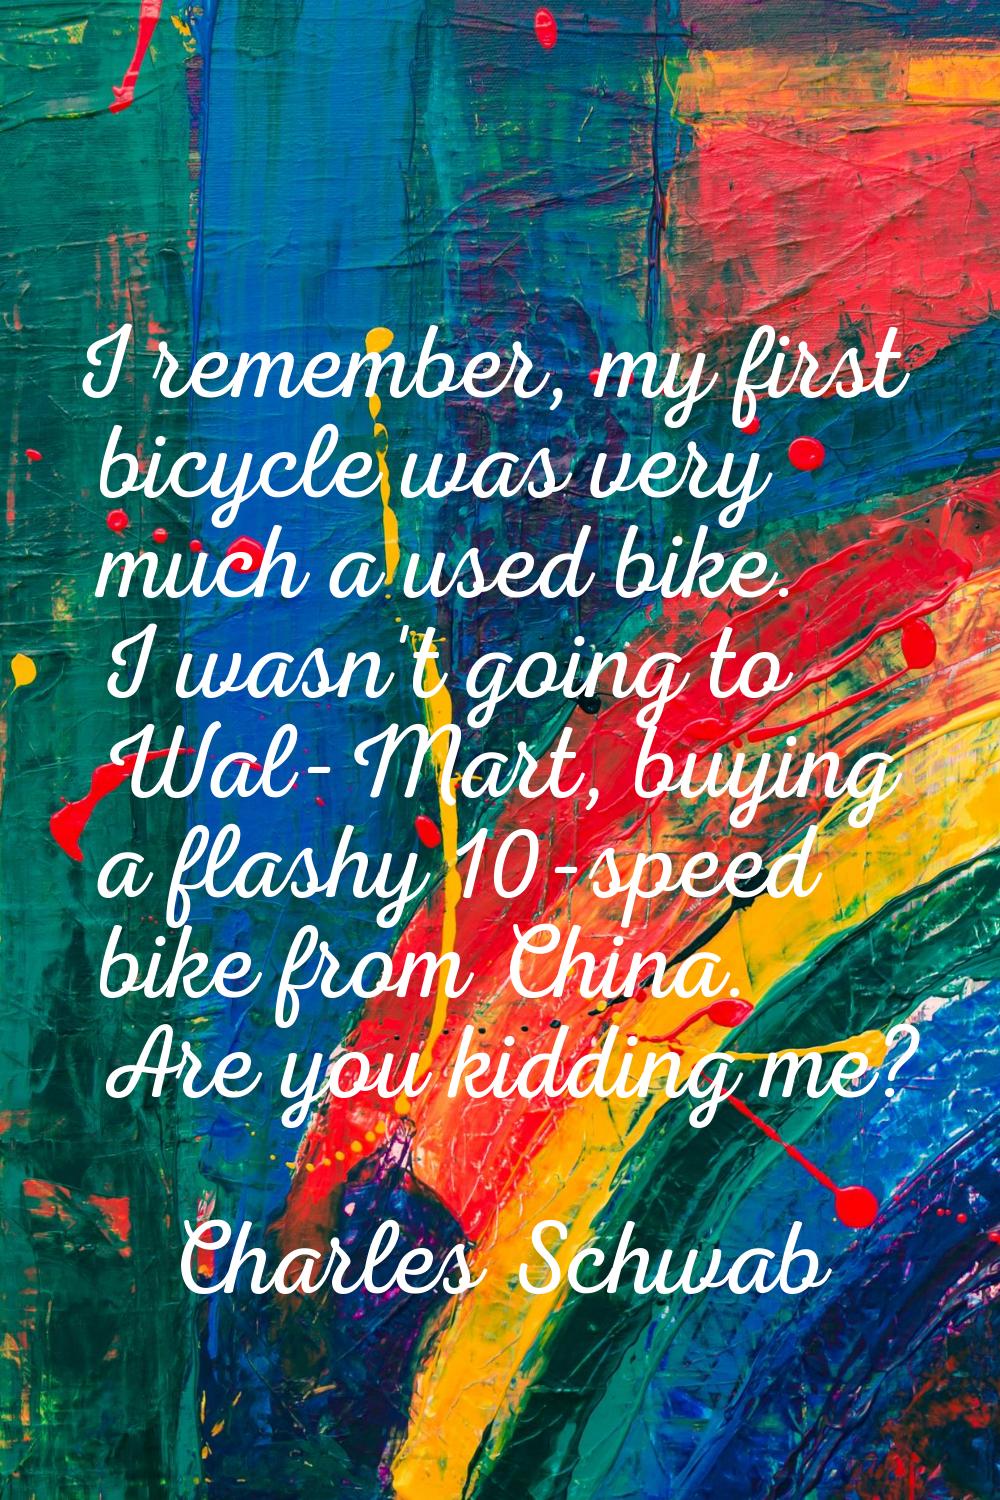 I remember, my first bicycle was very much a used bike. I wasn't going to Wal-Mart, buying a flashy